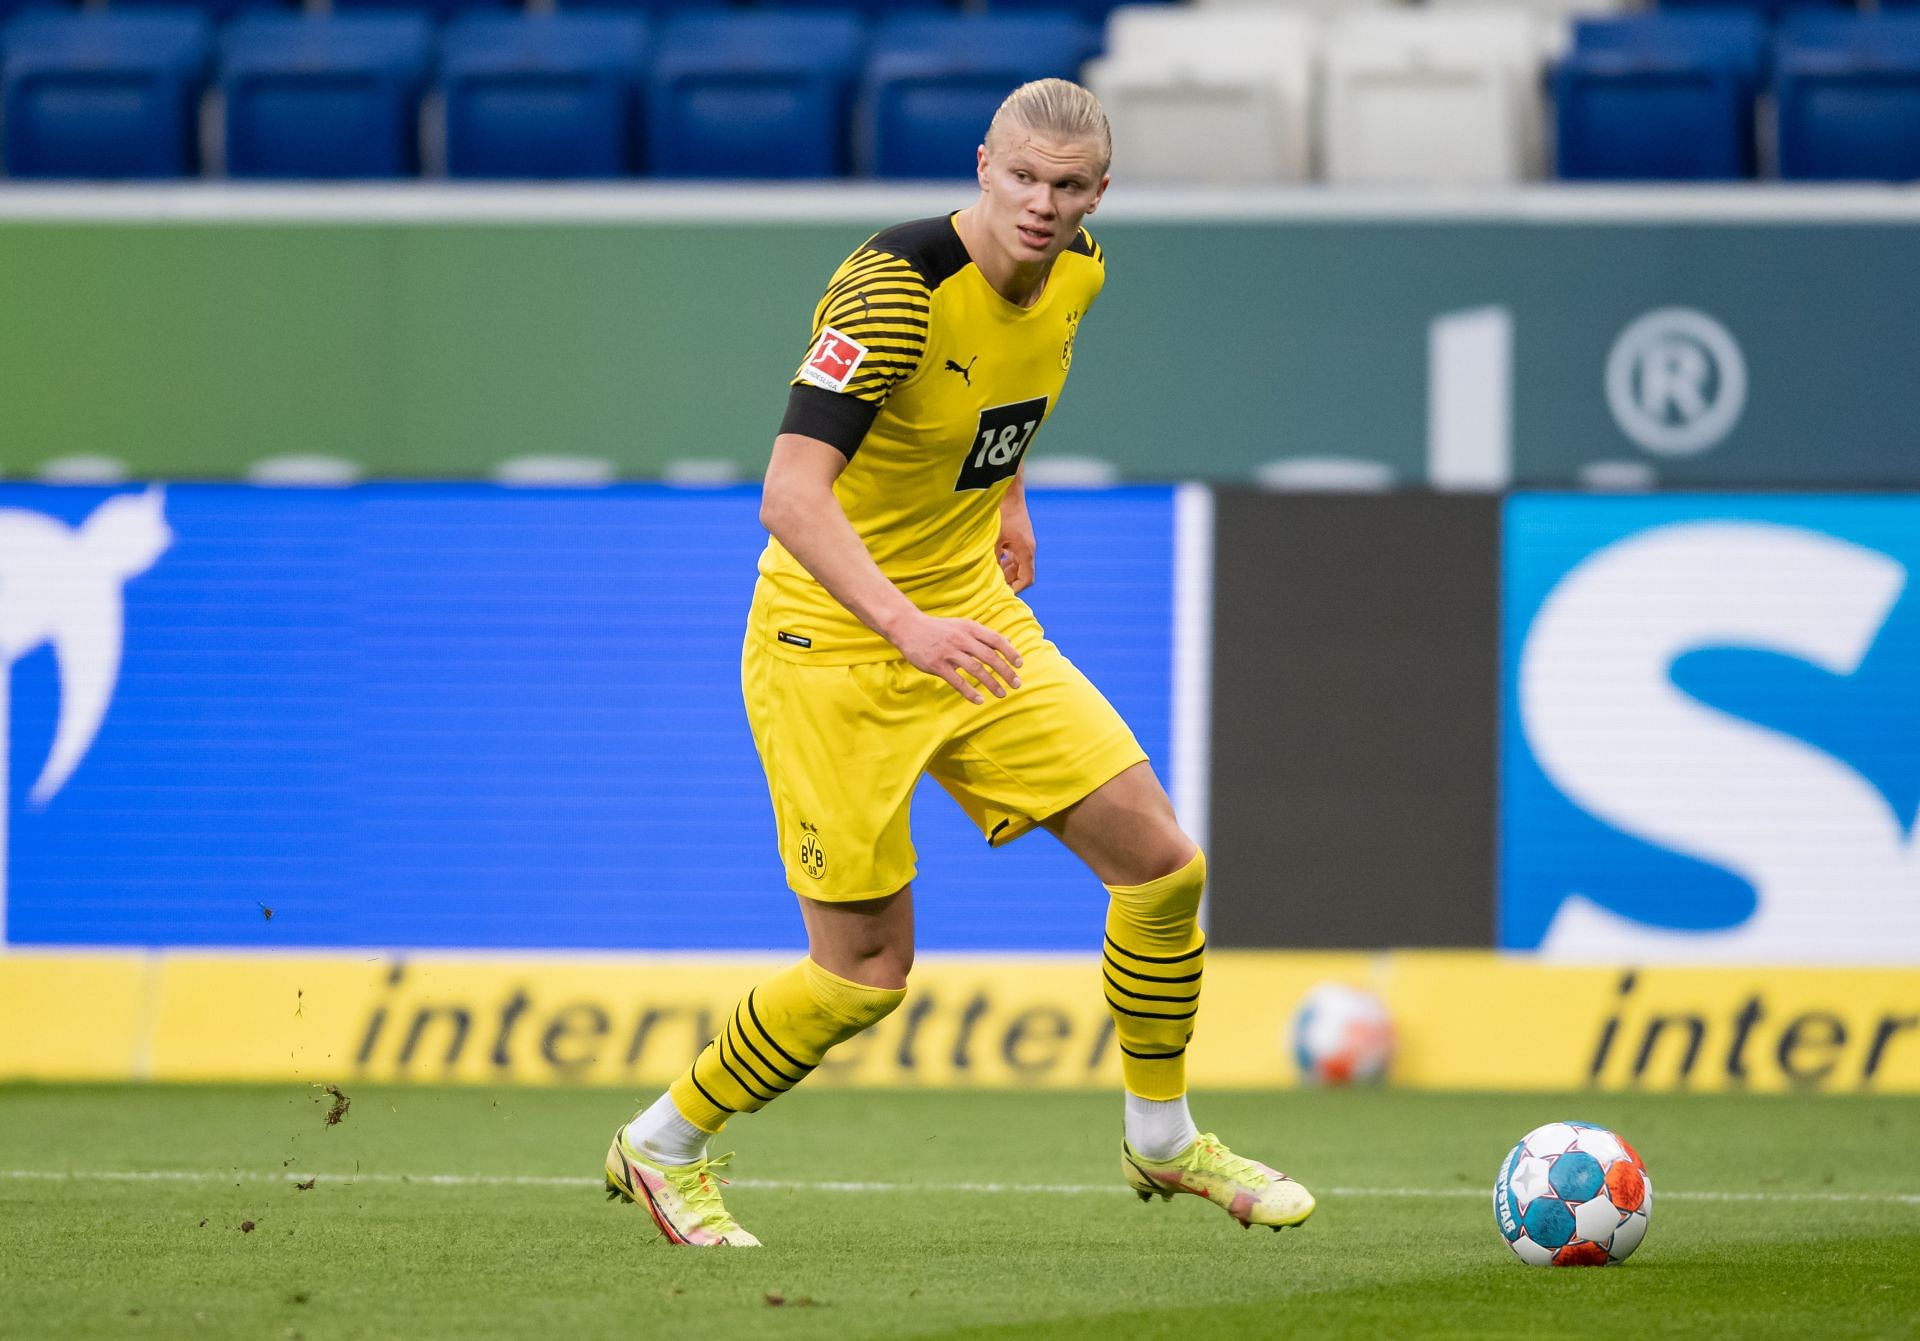 Erling Haaland has been on a tear since joining BvB two years ago